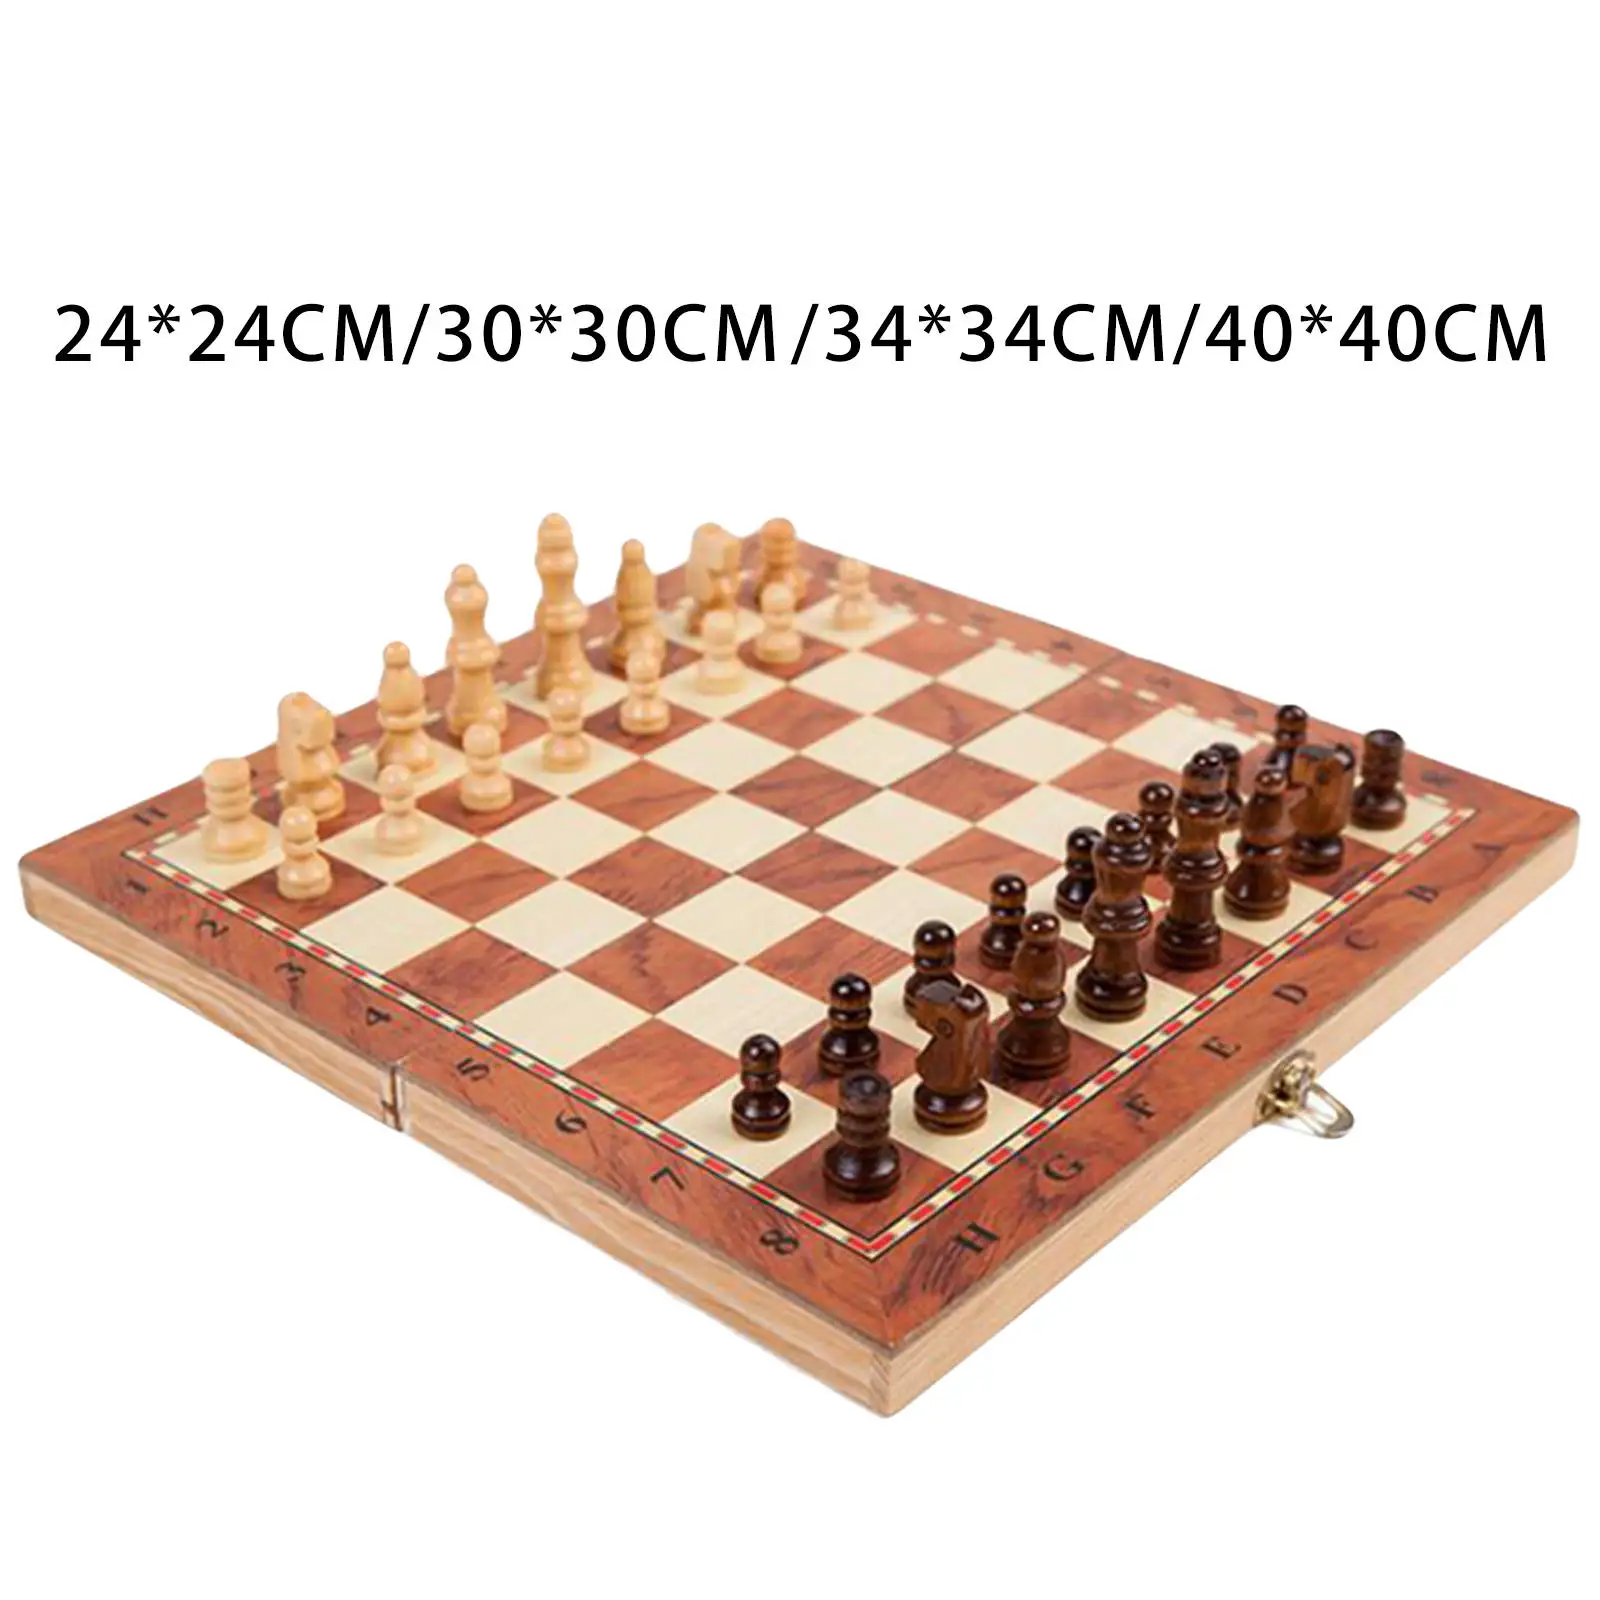 Handmade Wooden Chess Set Checkers Packed Gift Foldable Storage Staunton Educational Toy Table Game for Chess Lovers